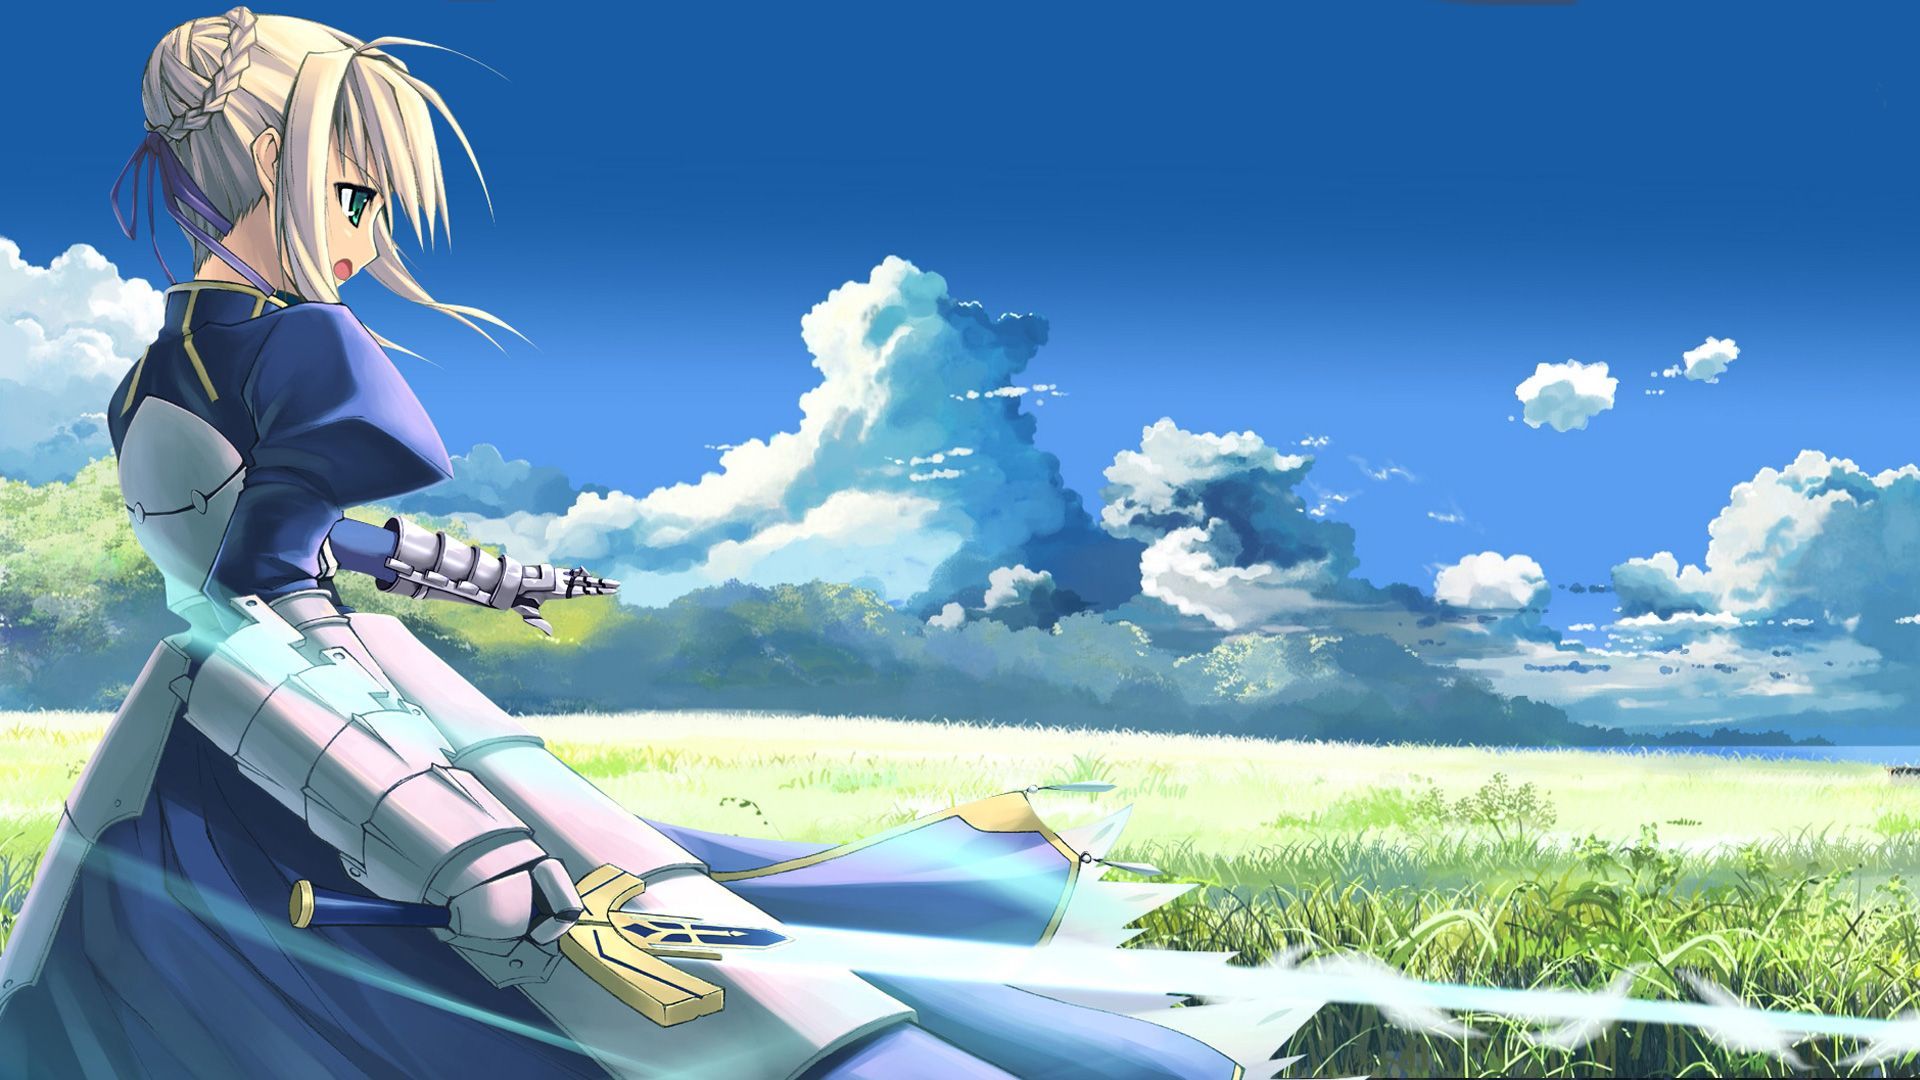 Fate Stay Night Saber Wallpaper